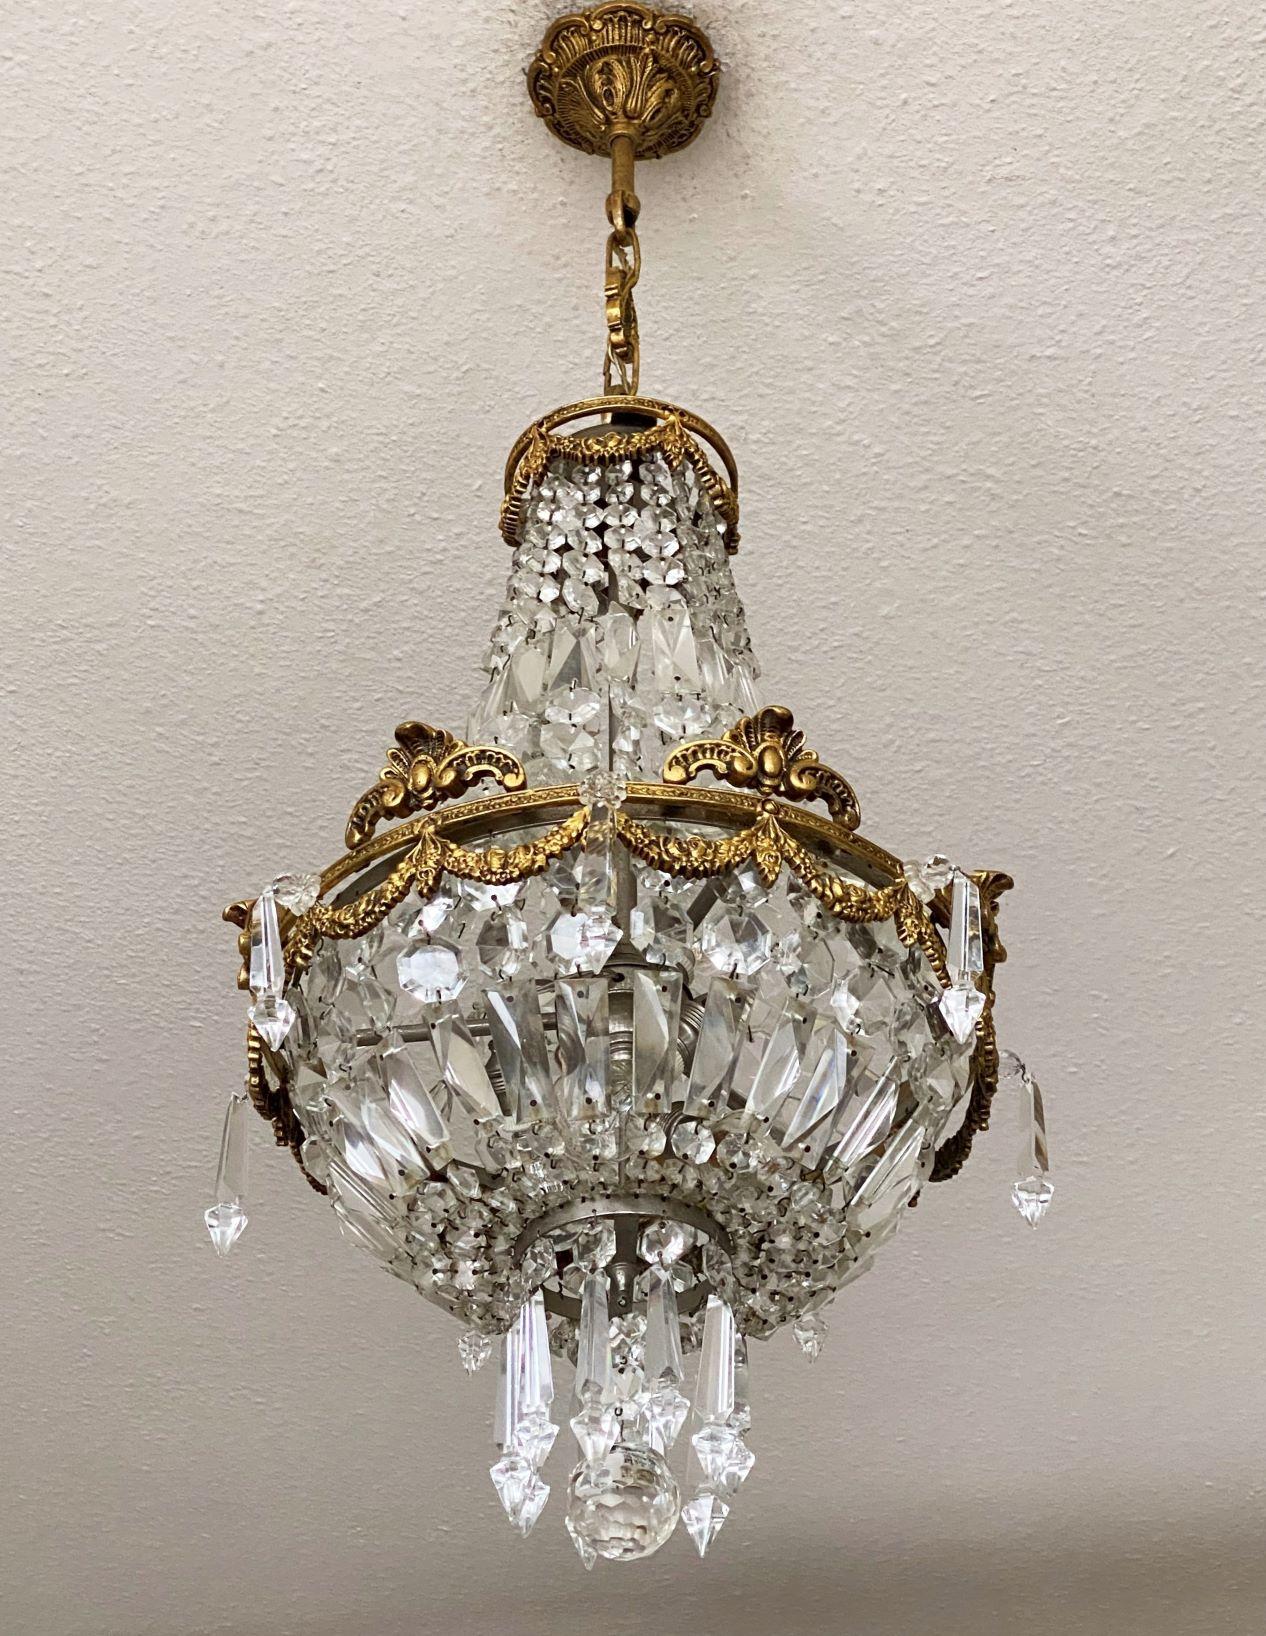 Pair of French Gilt Bronze Faceted Crystal Five-Light Chandeliers or Lanterns 1